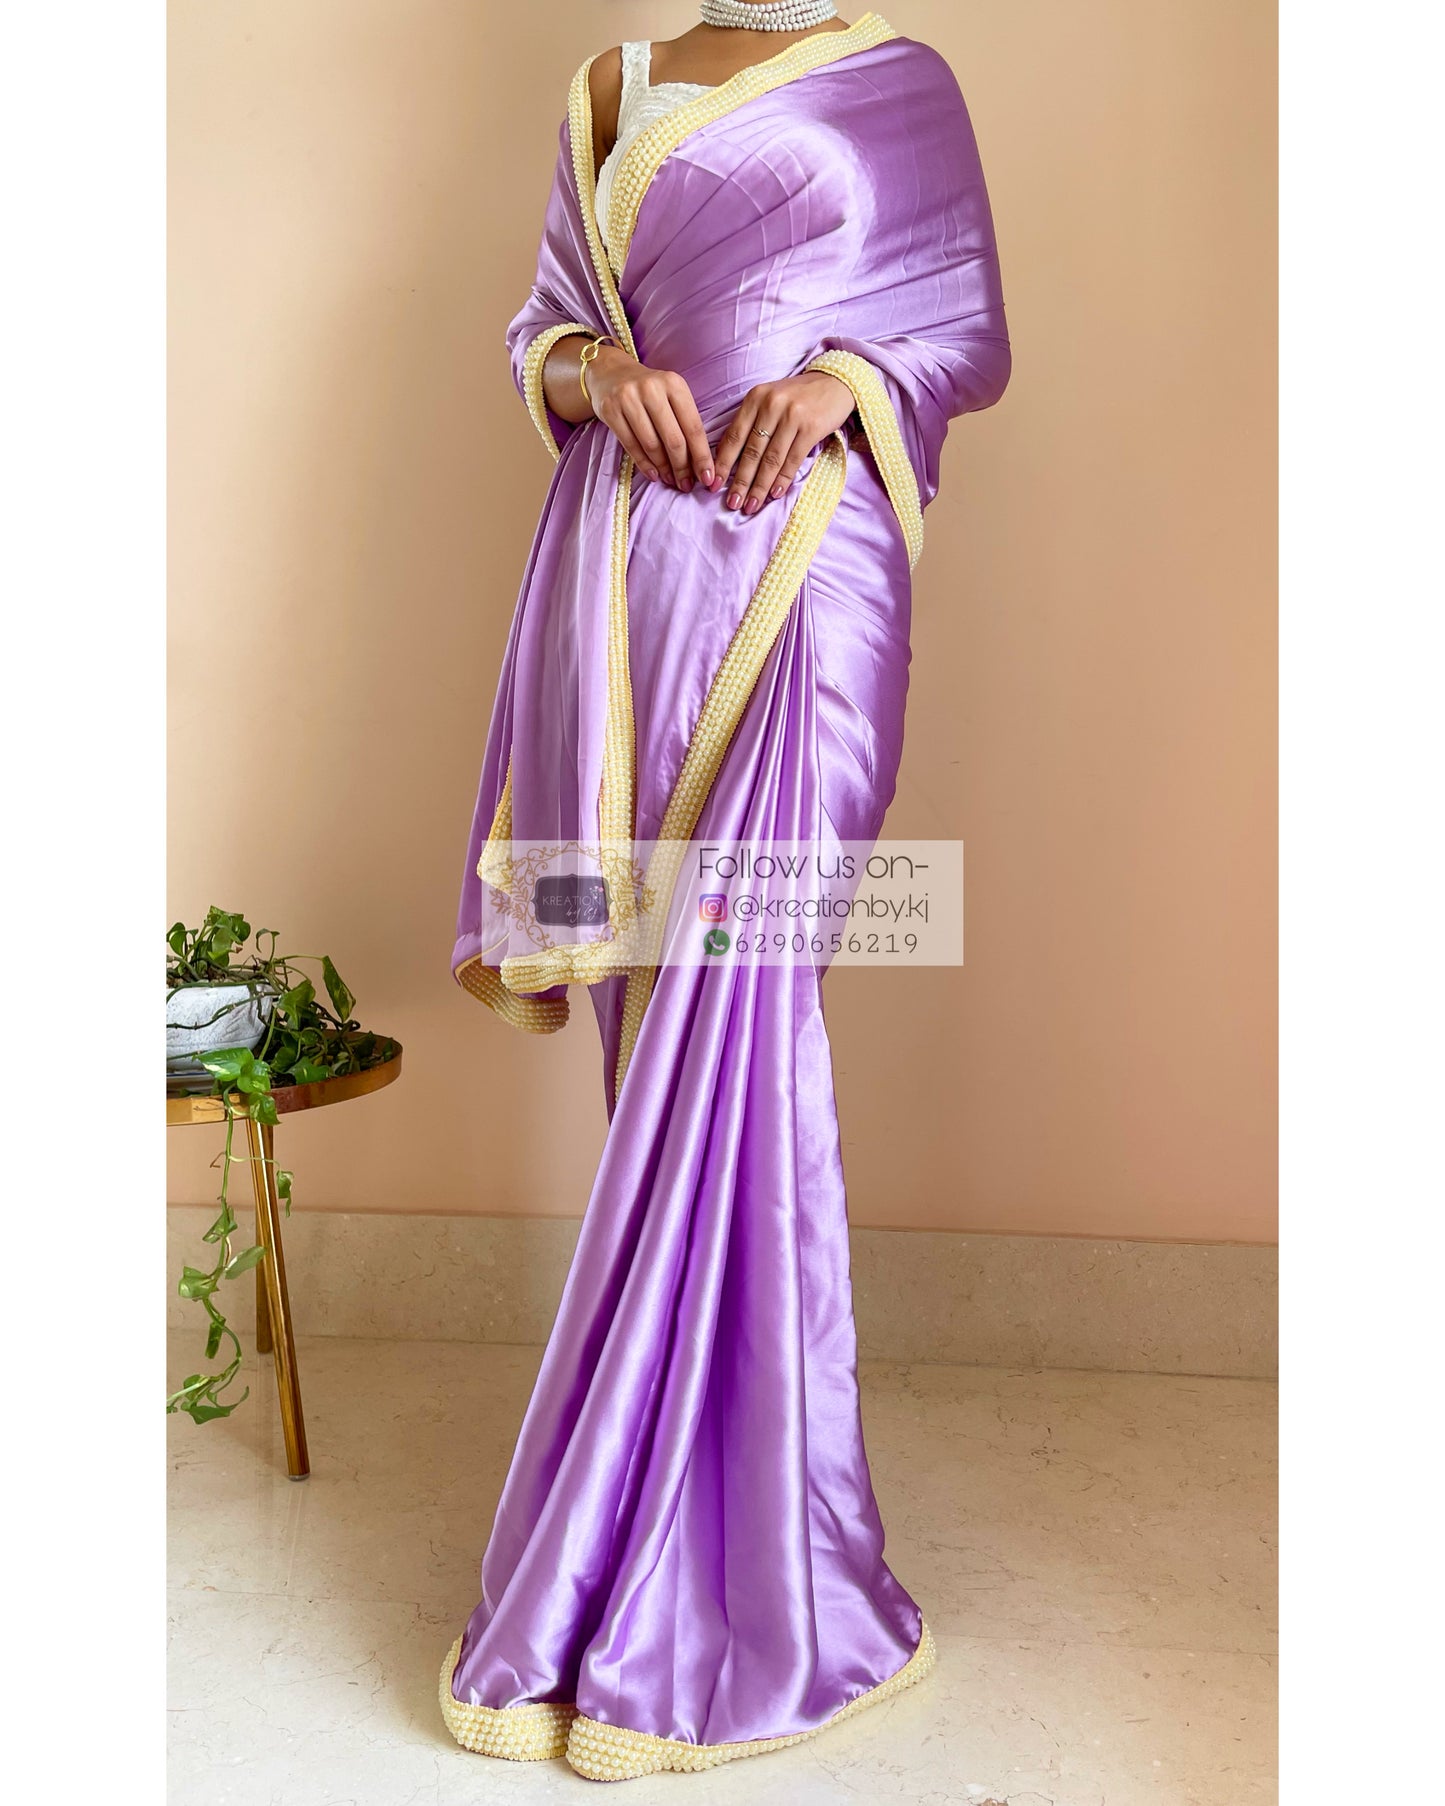 Periwinkle Mother of Pearl Saree - kreationbykj